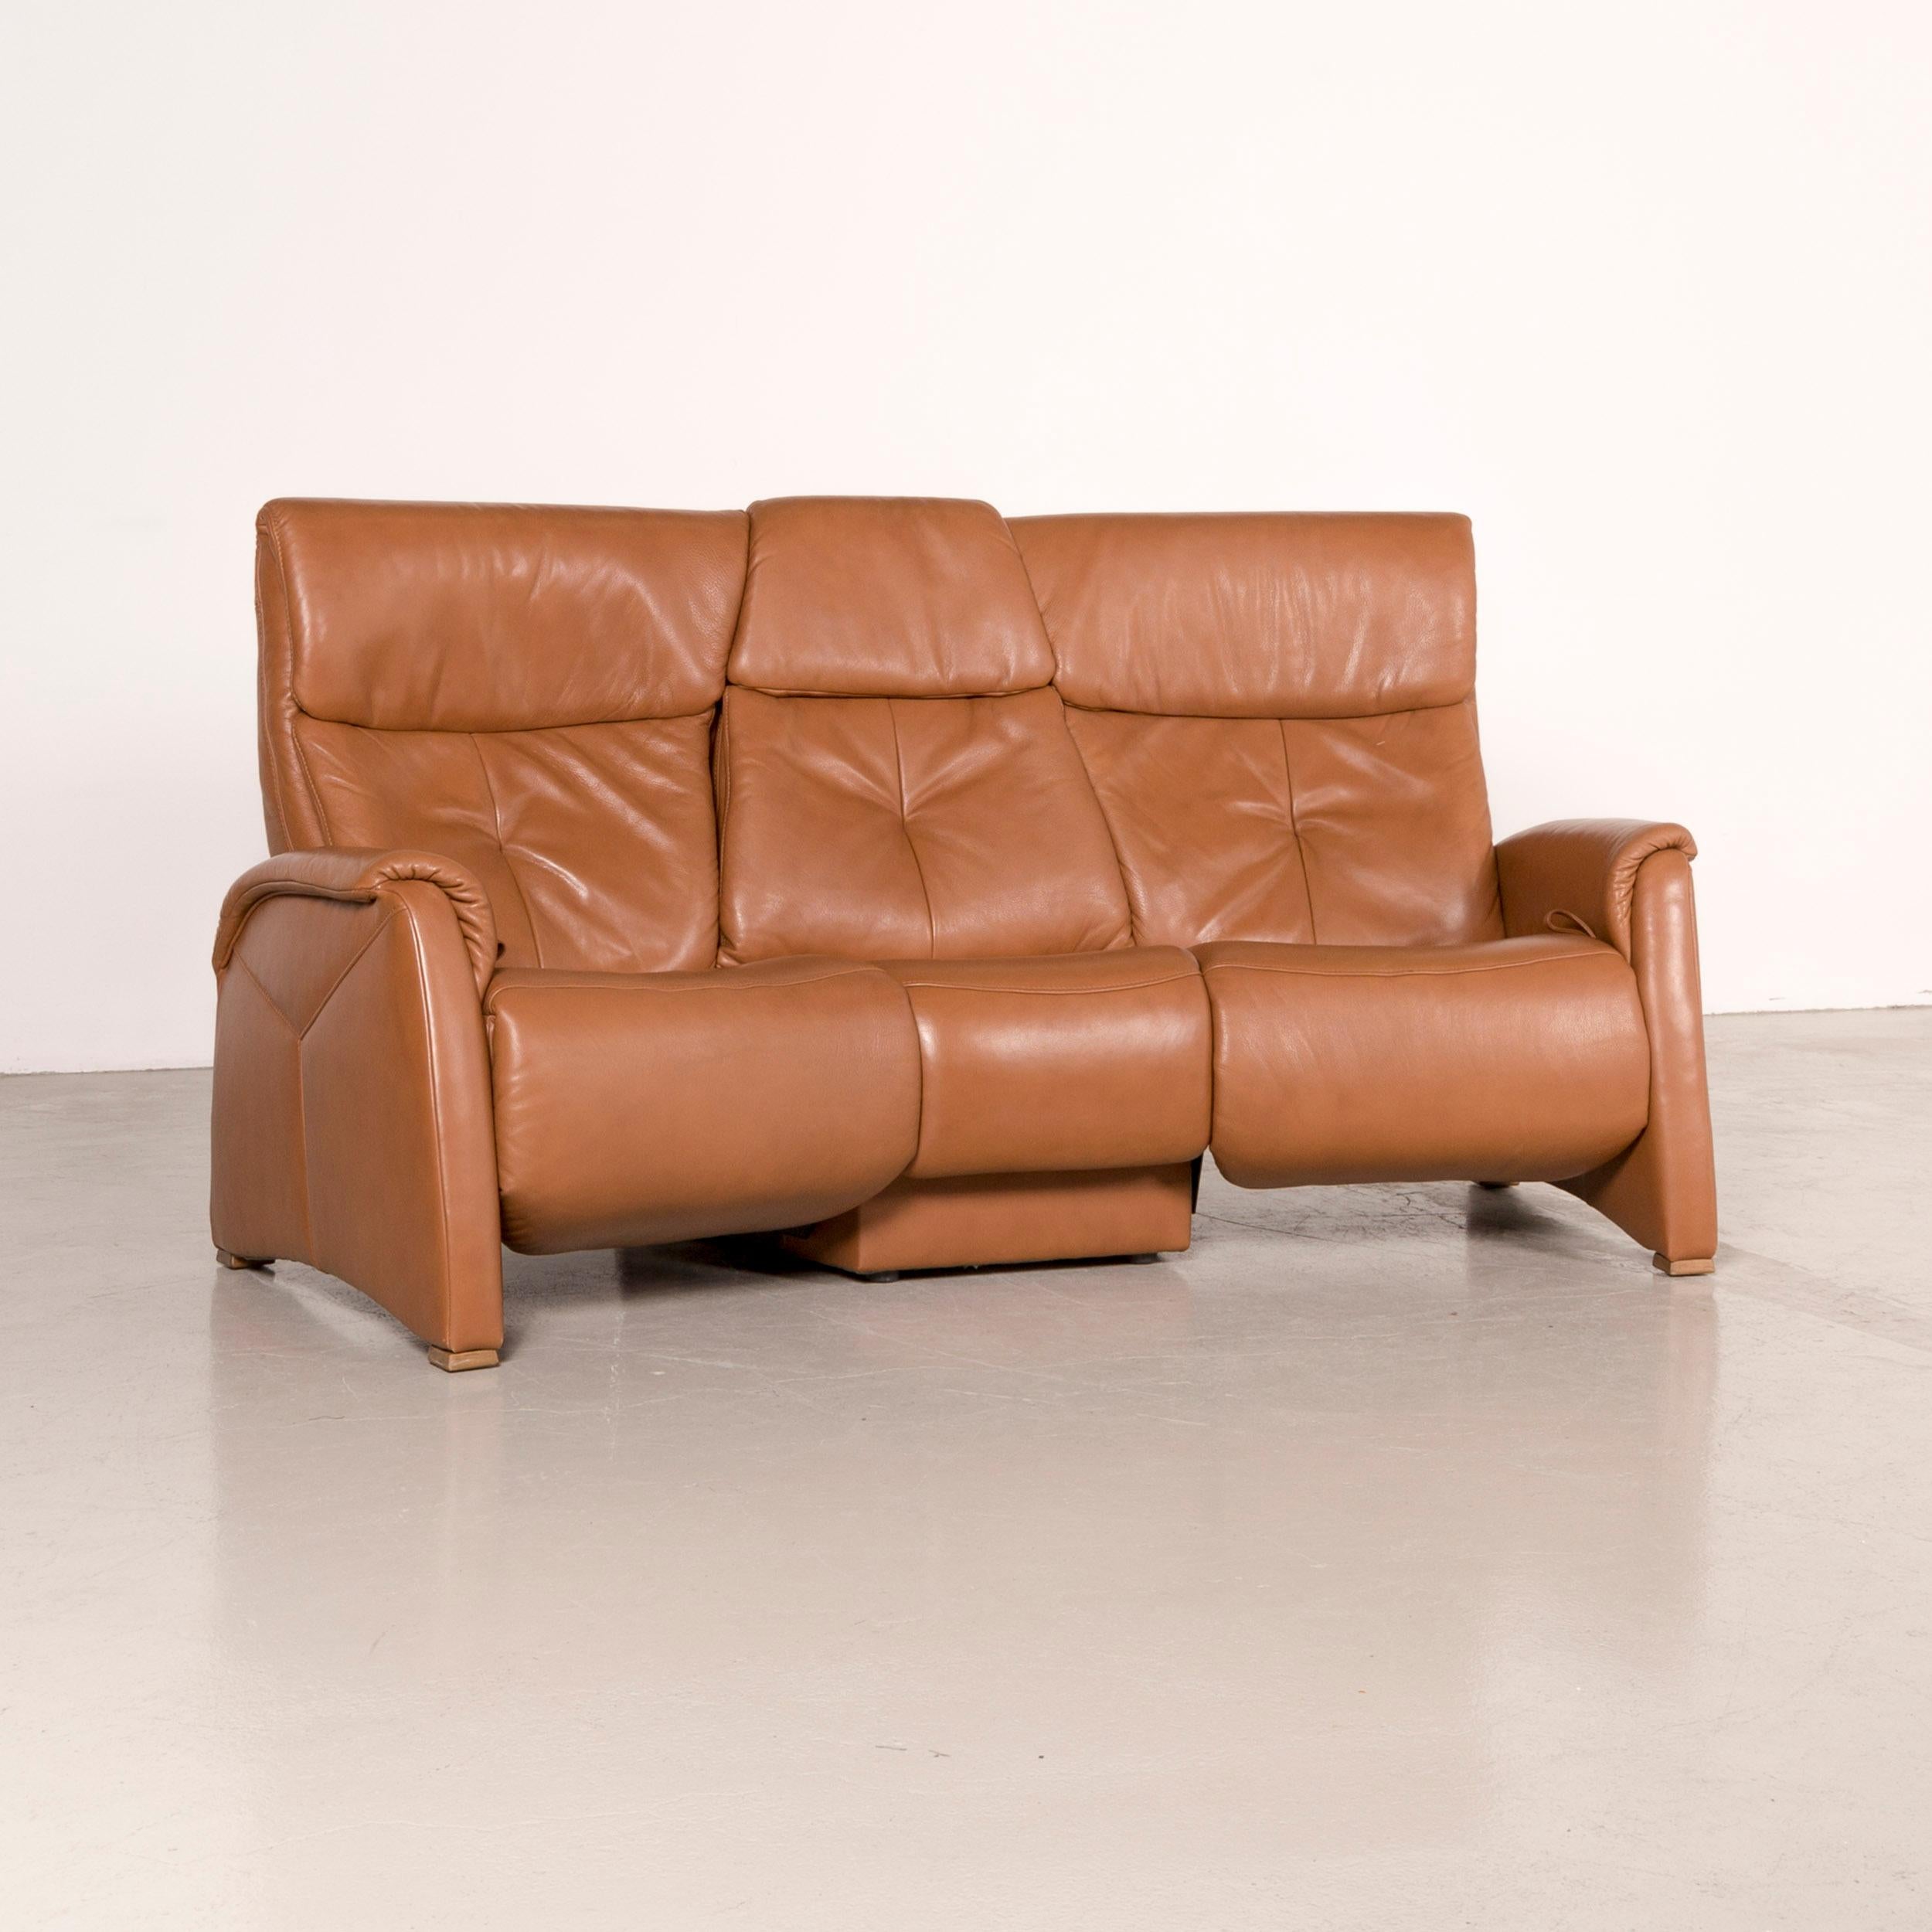 Modern Himolla Designer Sofa Brown Leather Three-Seat Couch Recliner Function For Sale